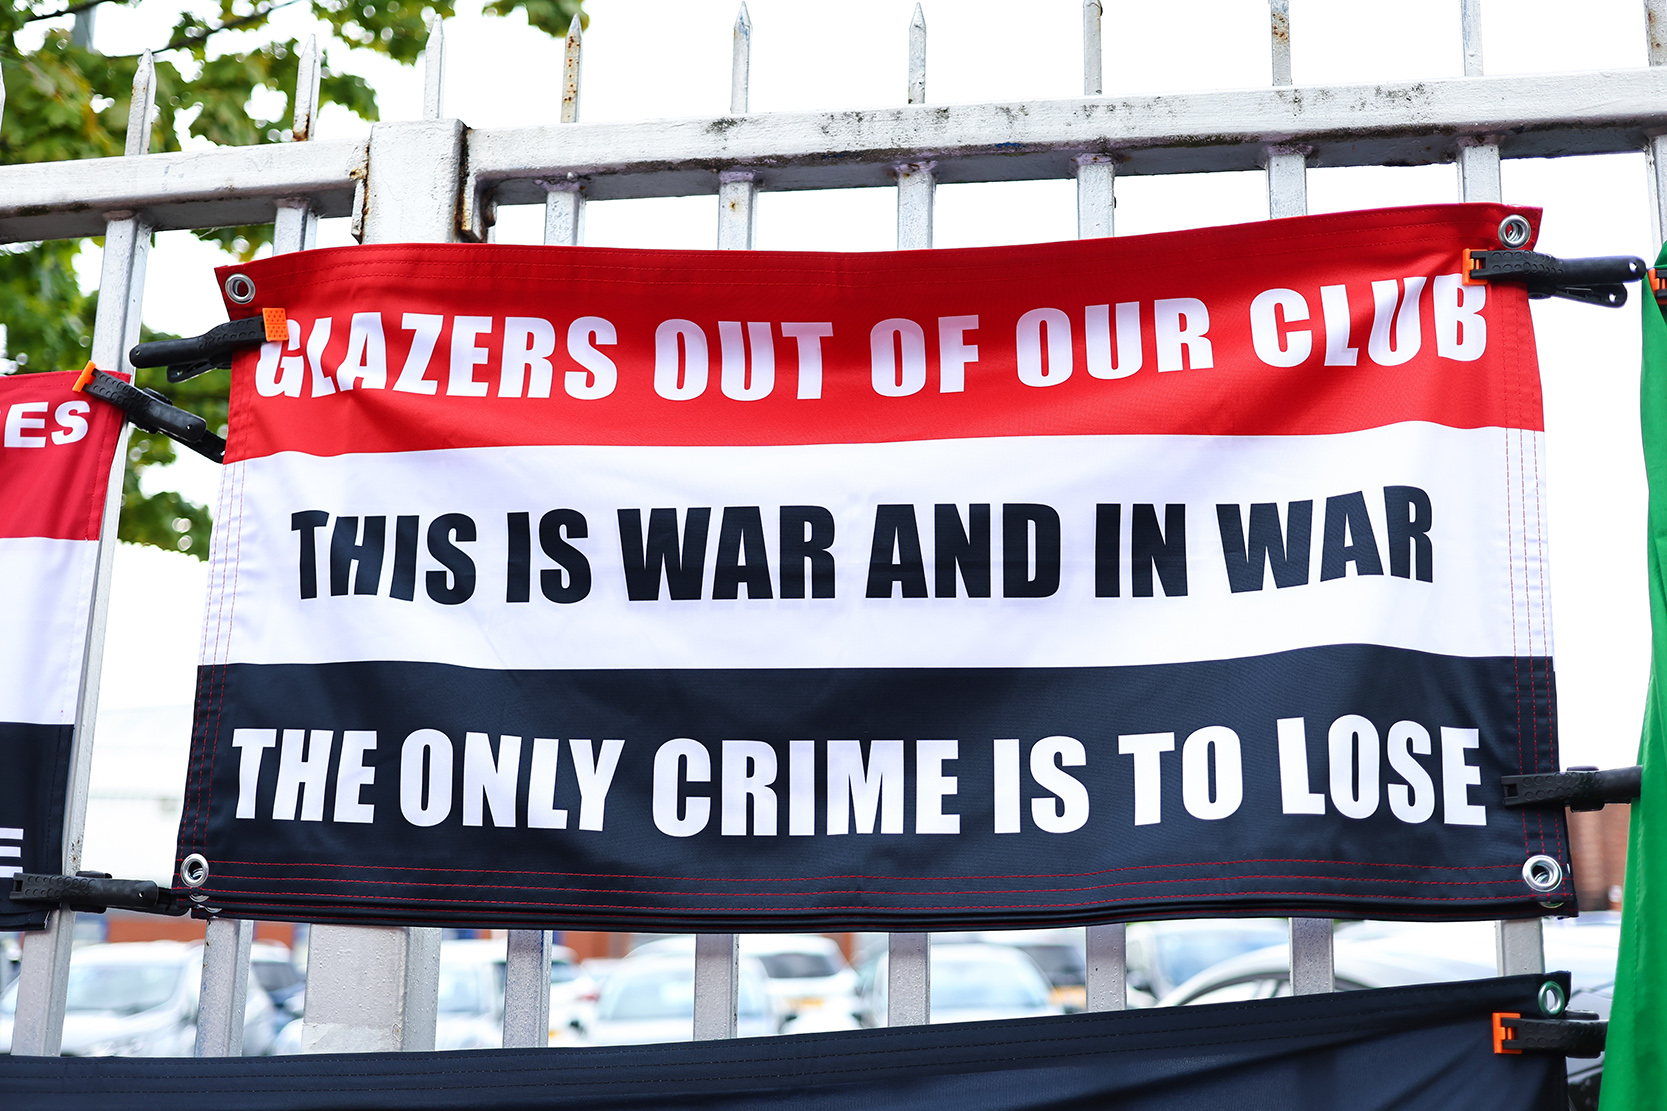 Manchester United fans protest against the Glazer family ownership